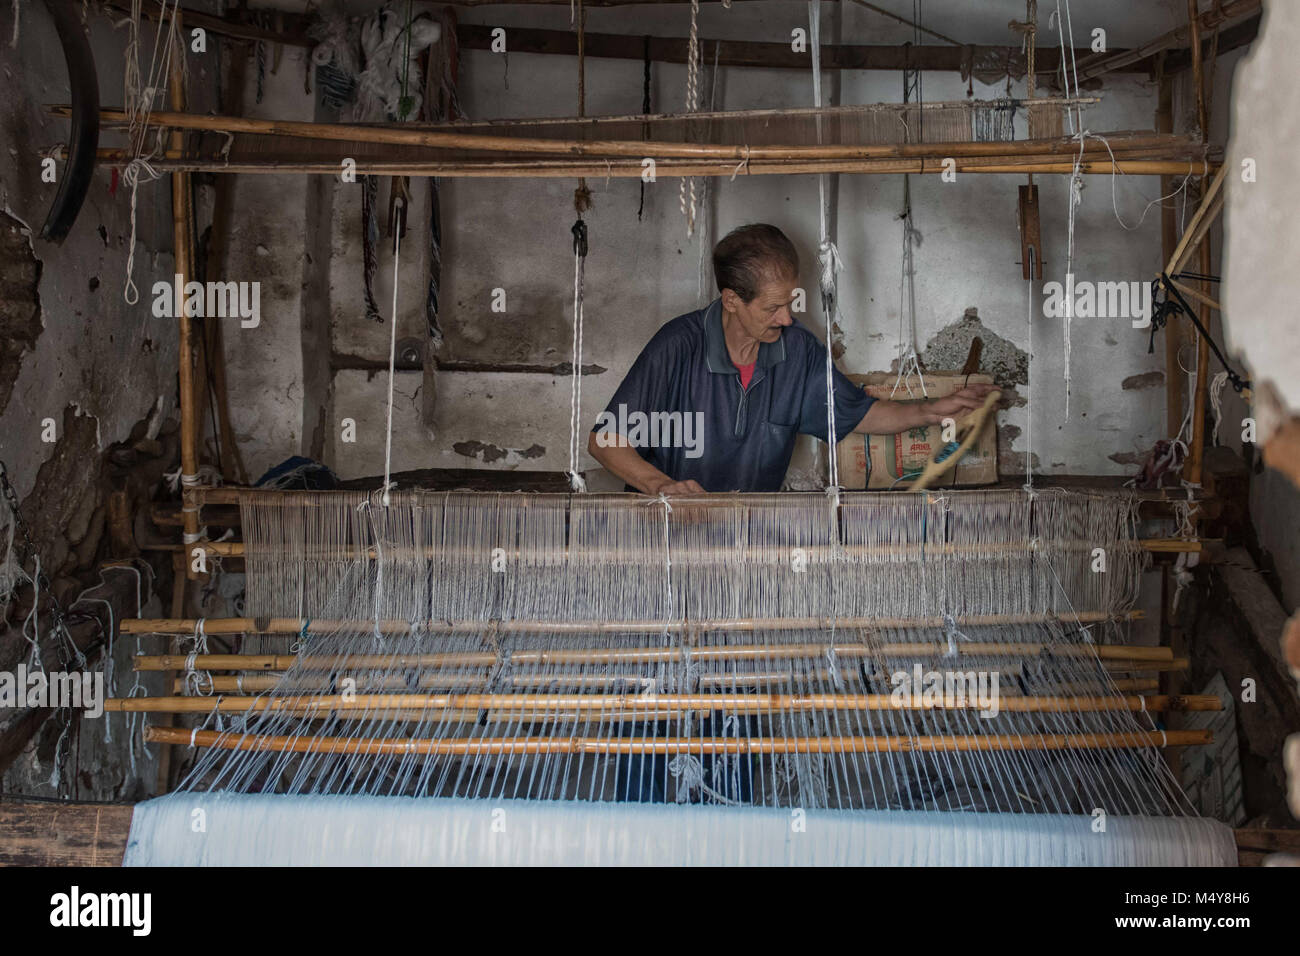 A local Moroccan man weaves on an old bamboo loom in the medina of Marrakech, Morocco. The loom takes up almost the entire room in the man's room. Stock Photo